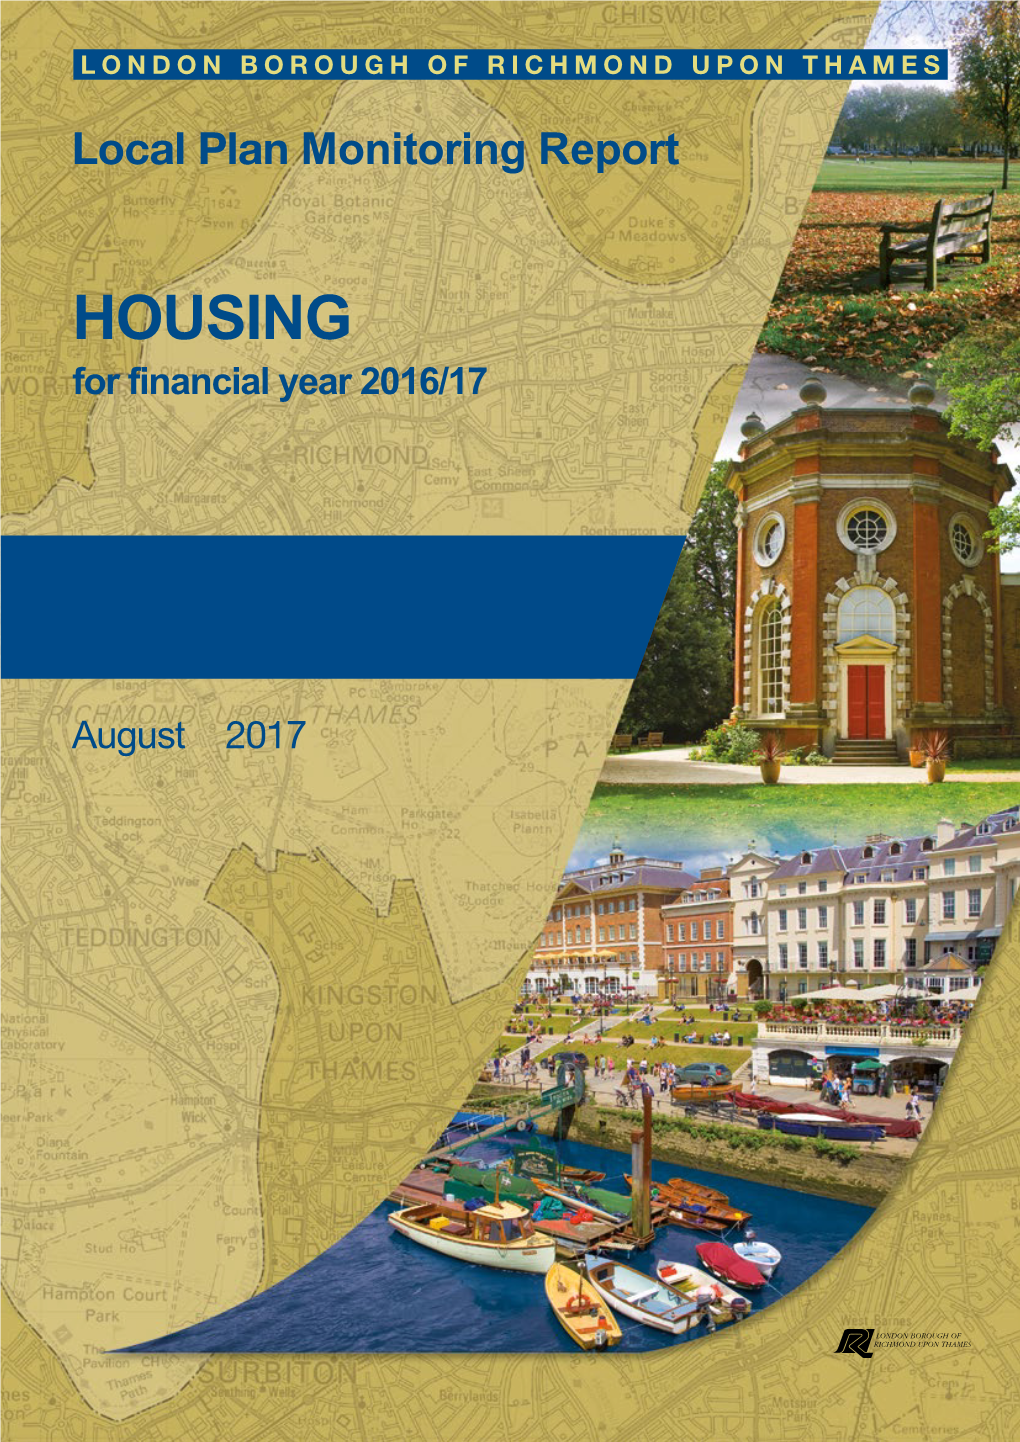 HOUSING for Financial Year 2016/17